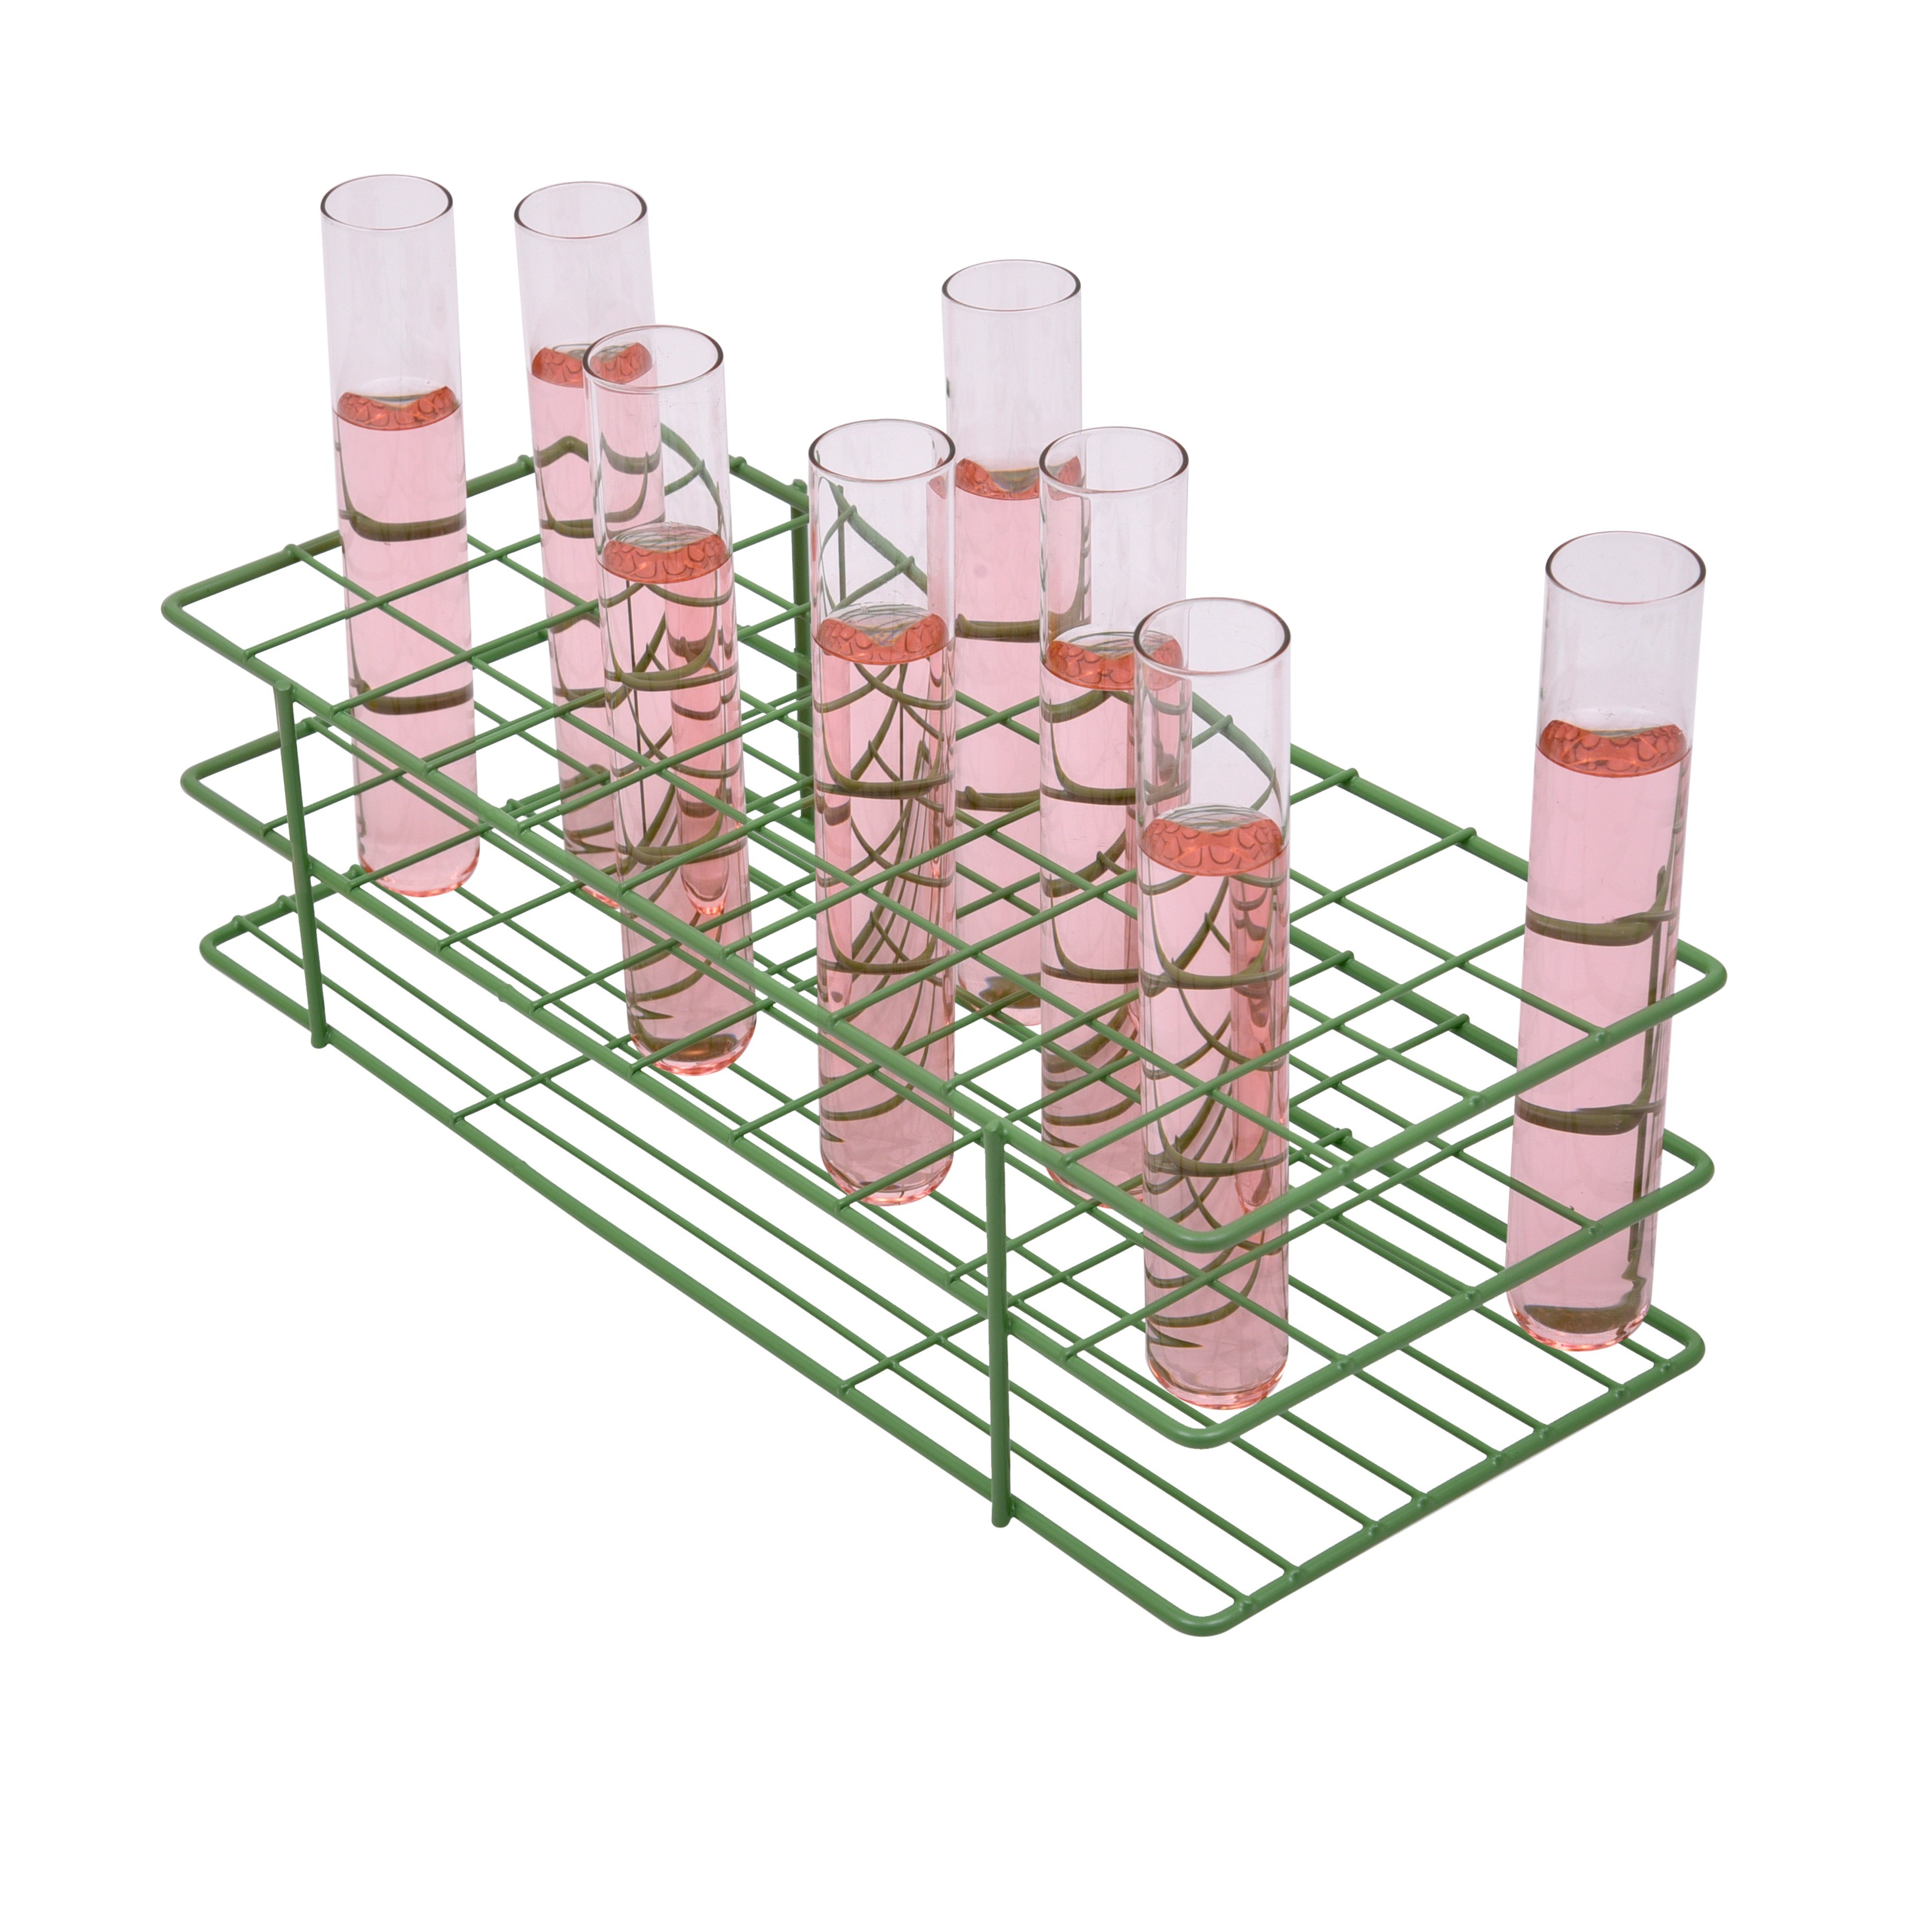 SP Bel-Art Poxygrid Test Tube Rack; For 20-25mm Tubes, 40 Places, Green